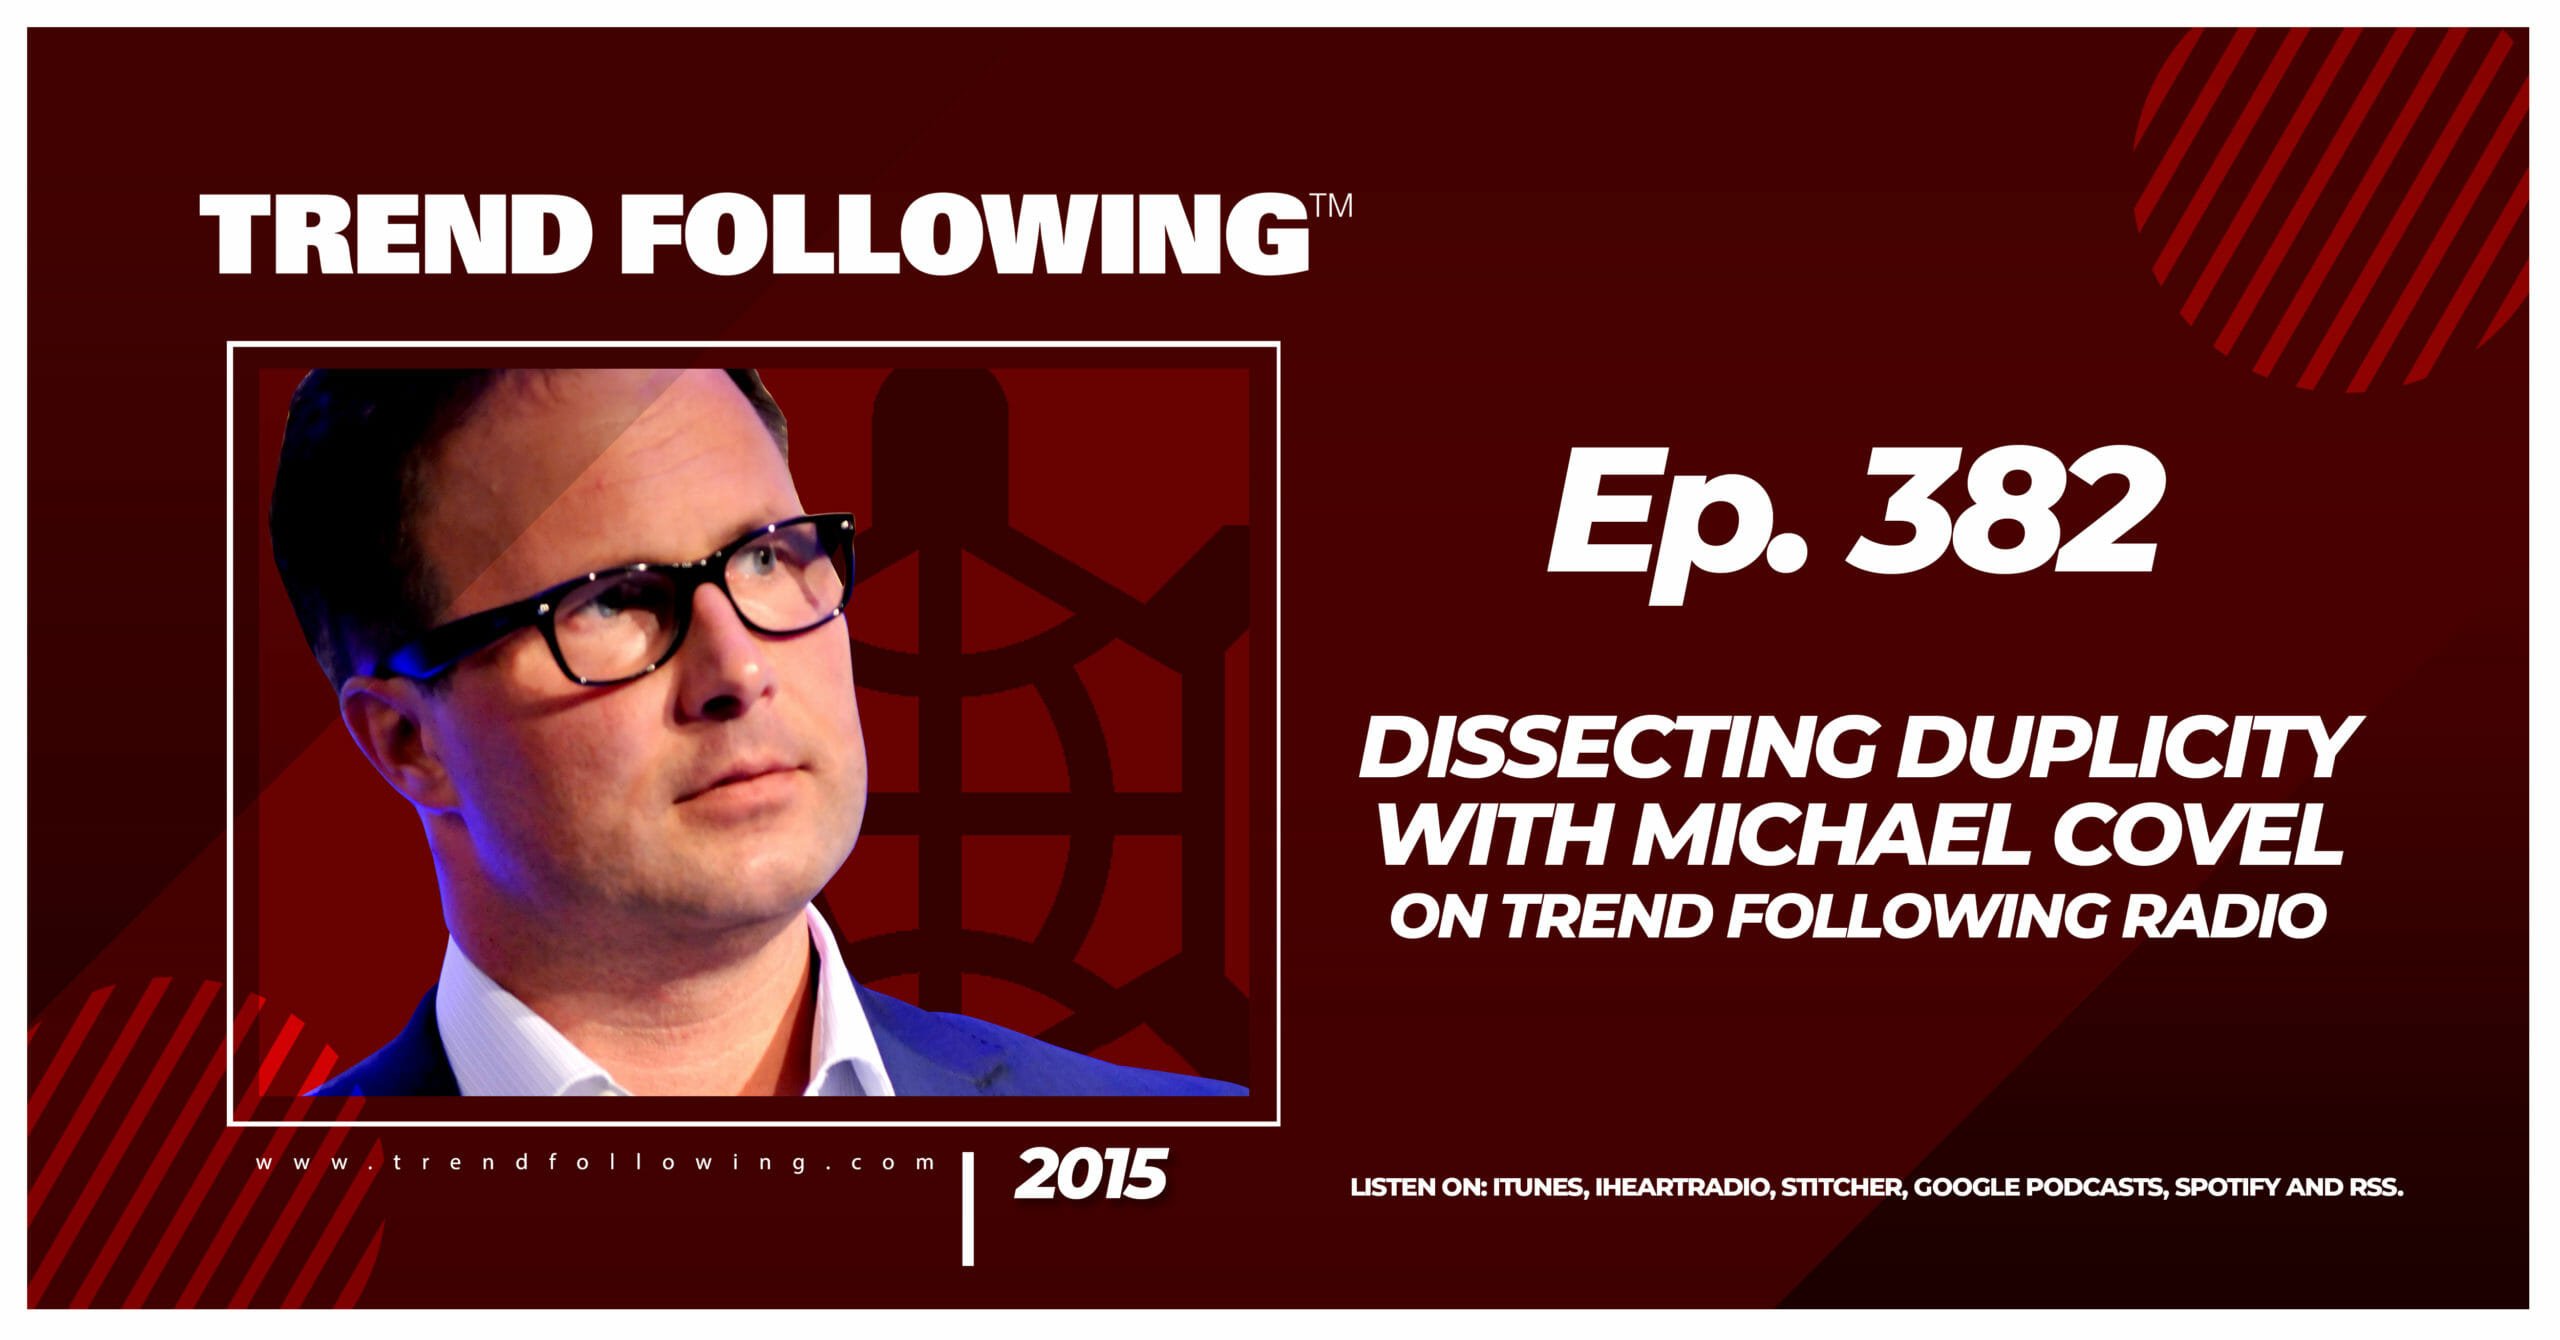 Dissecting Duplicity with Michael Covel on Trend Following Radio